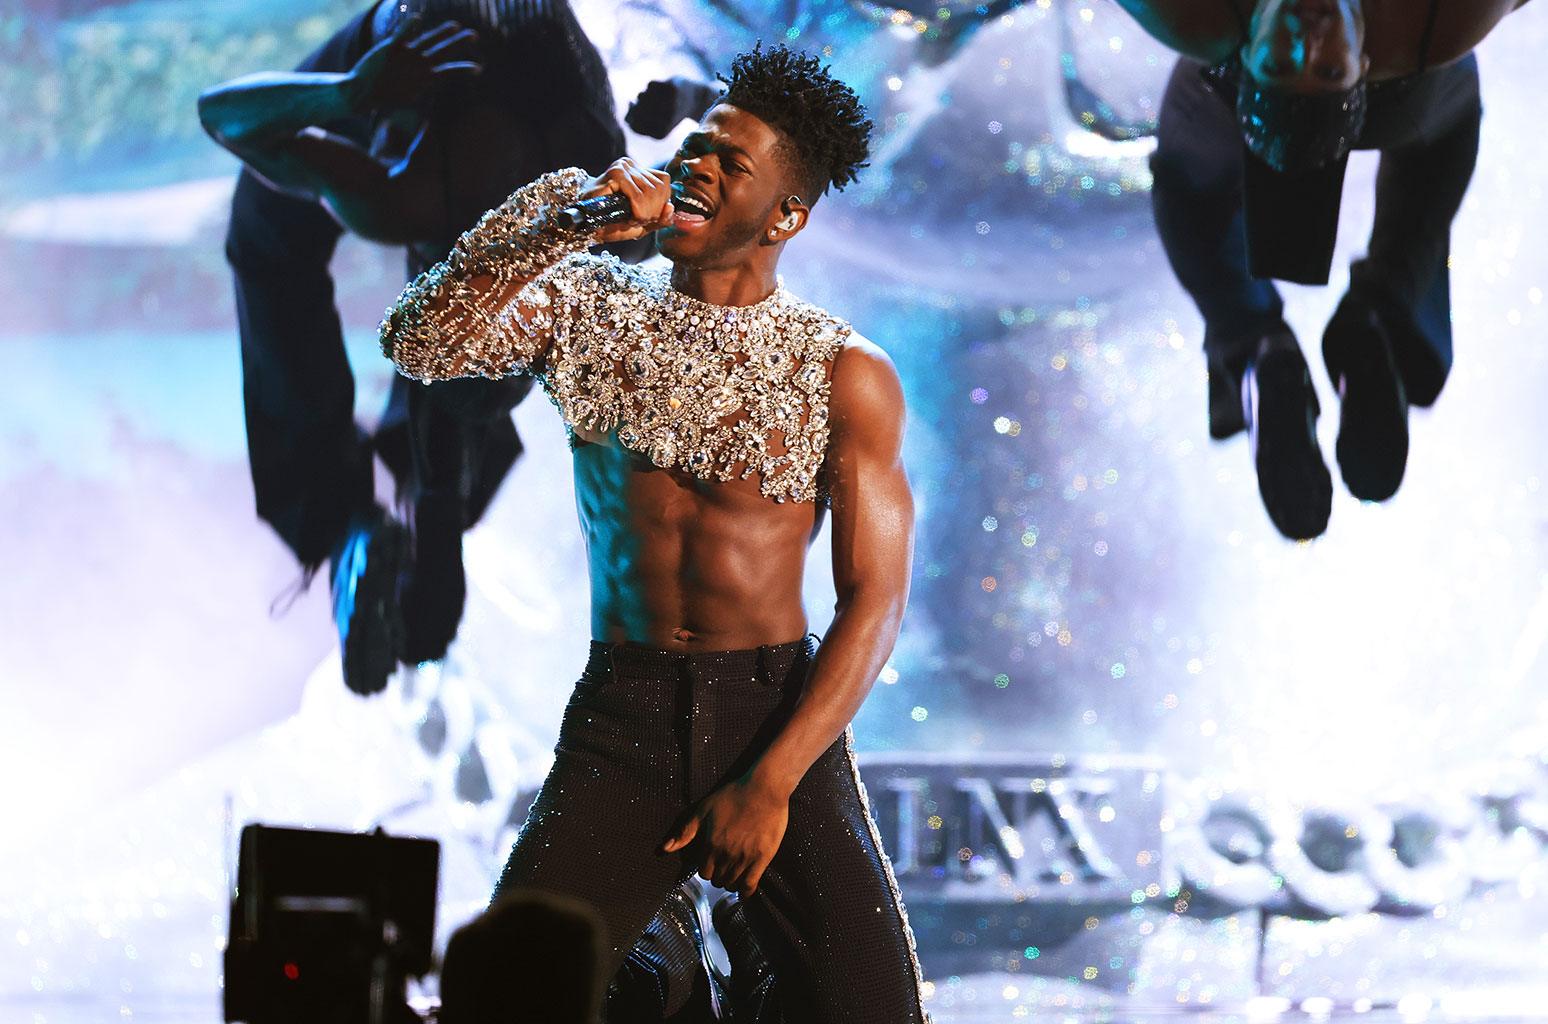 lil-nas-x-wore-balmain-while-performing-industry-baby-and-montero-2022-grammy-awards